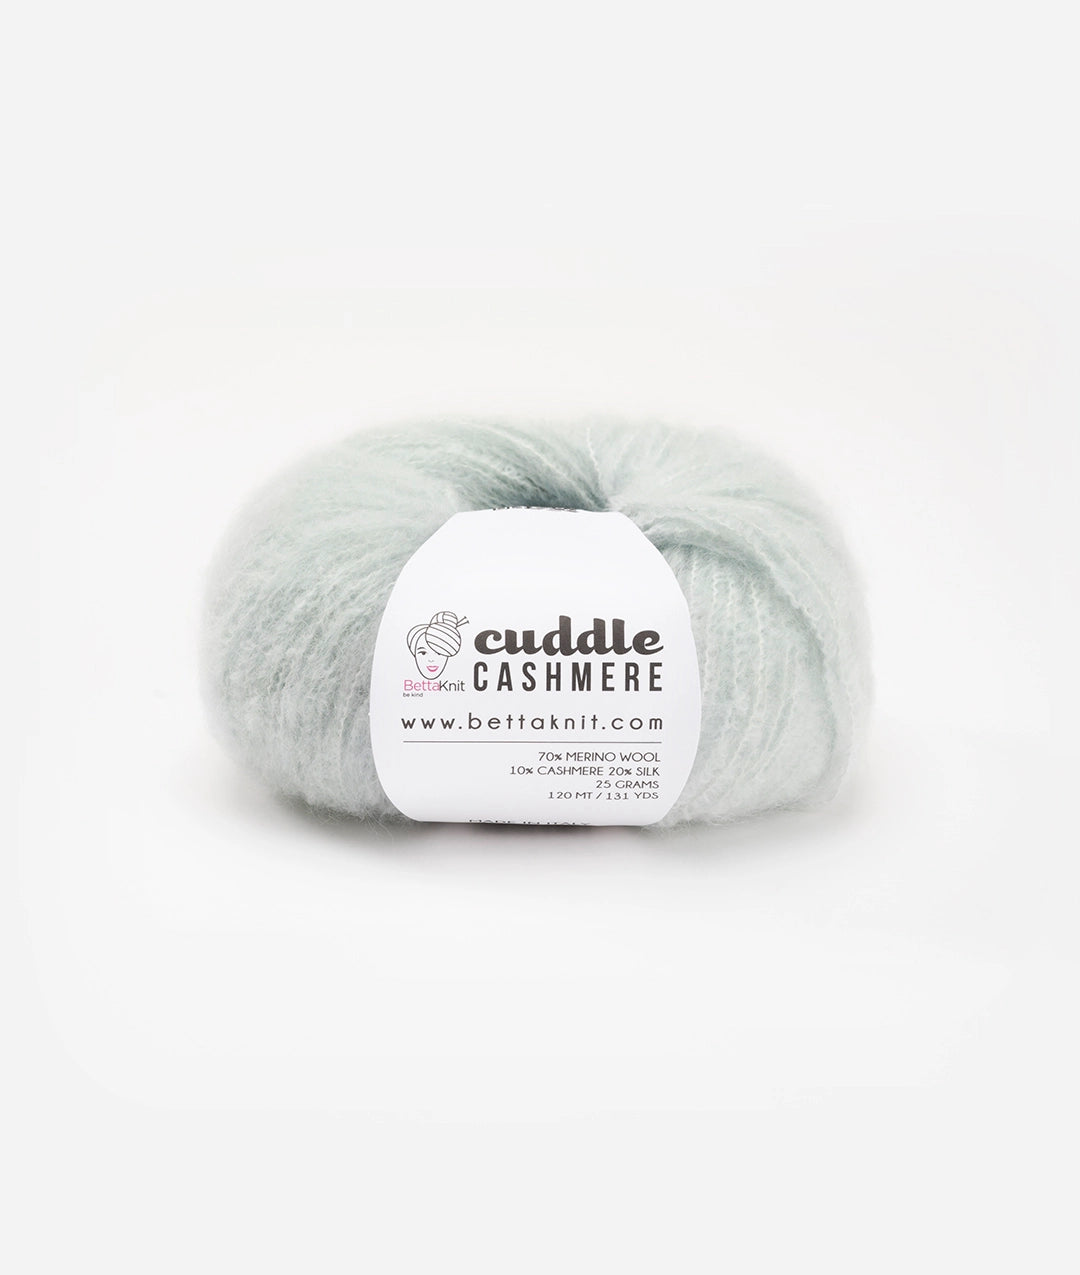 Cuddle Cashmere - Soft and Very Warm Cashmere